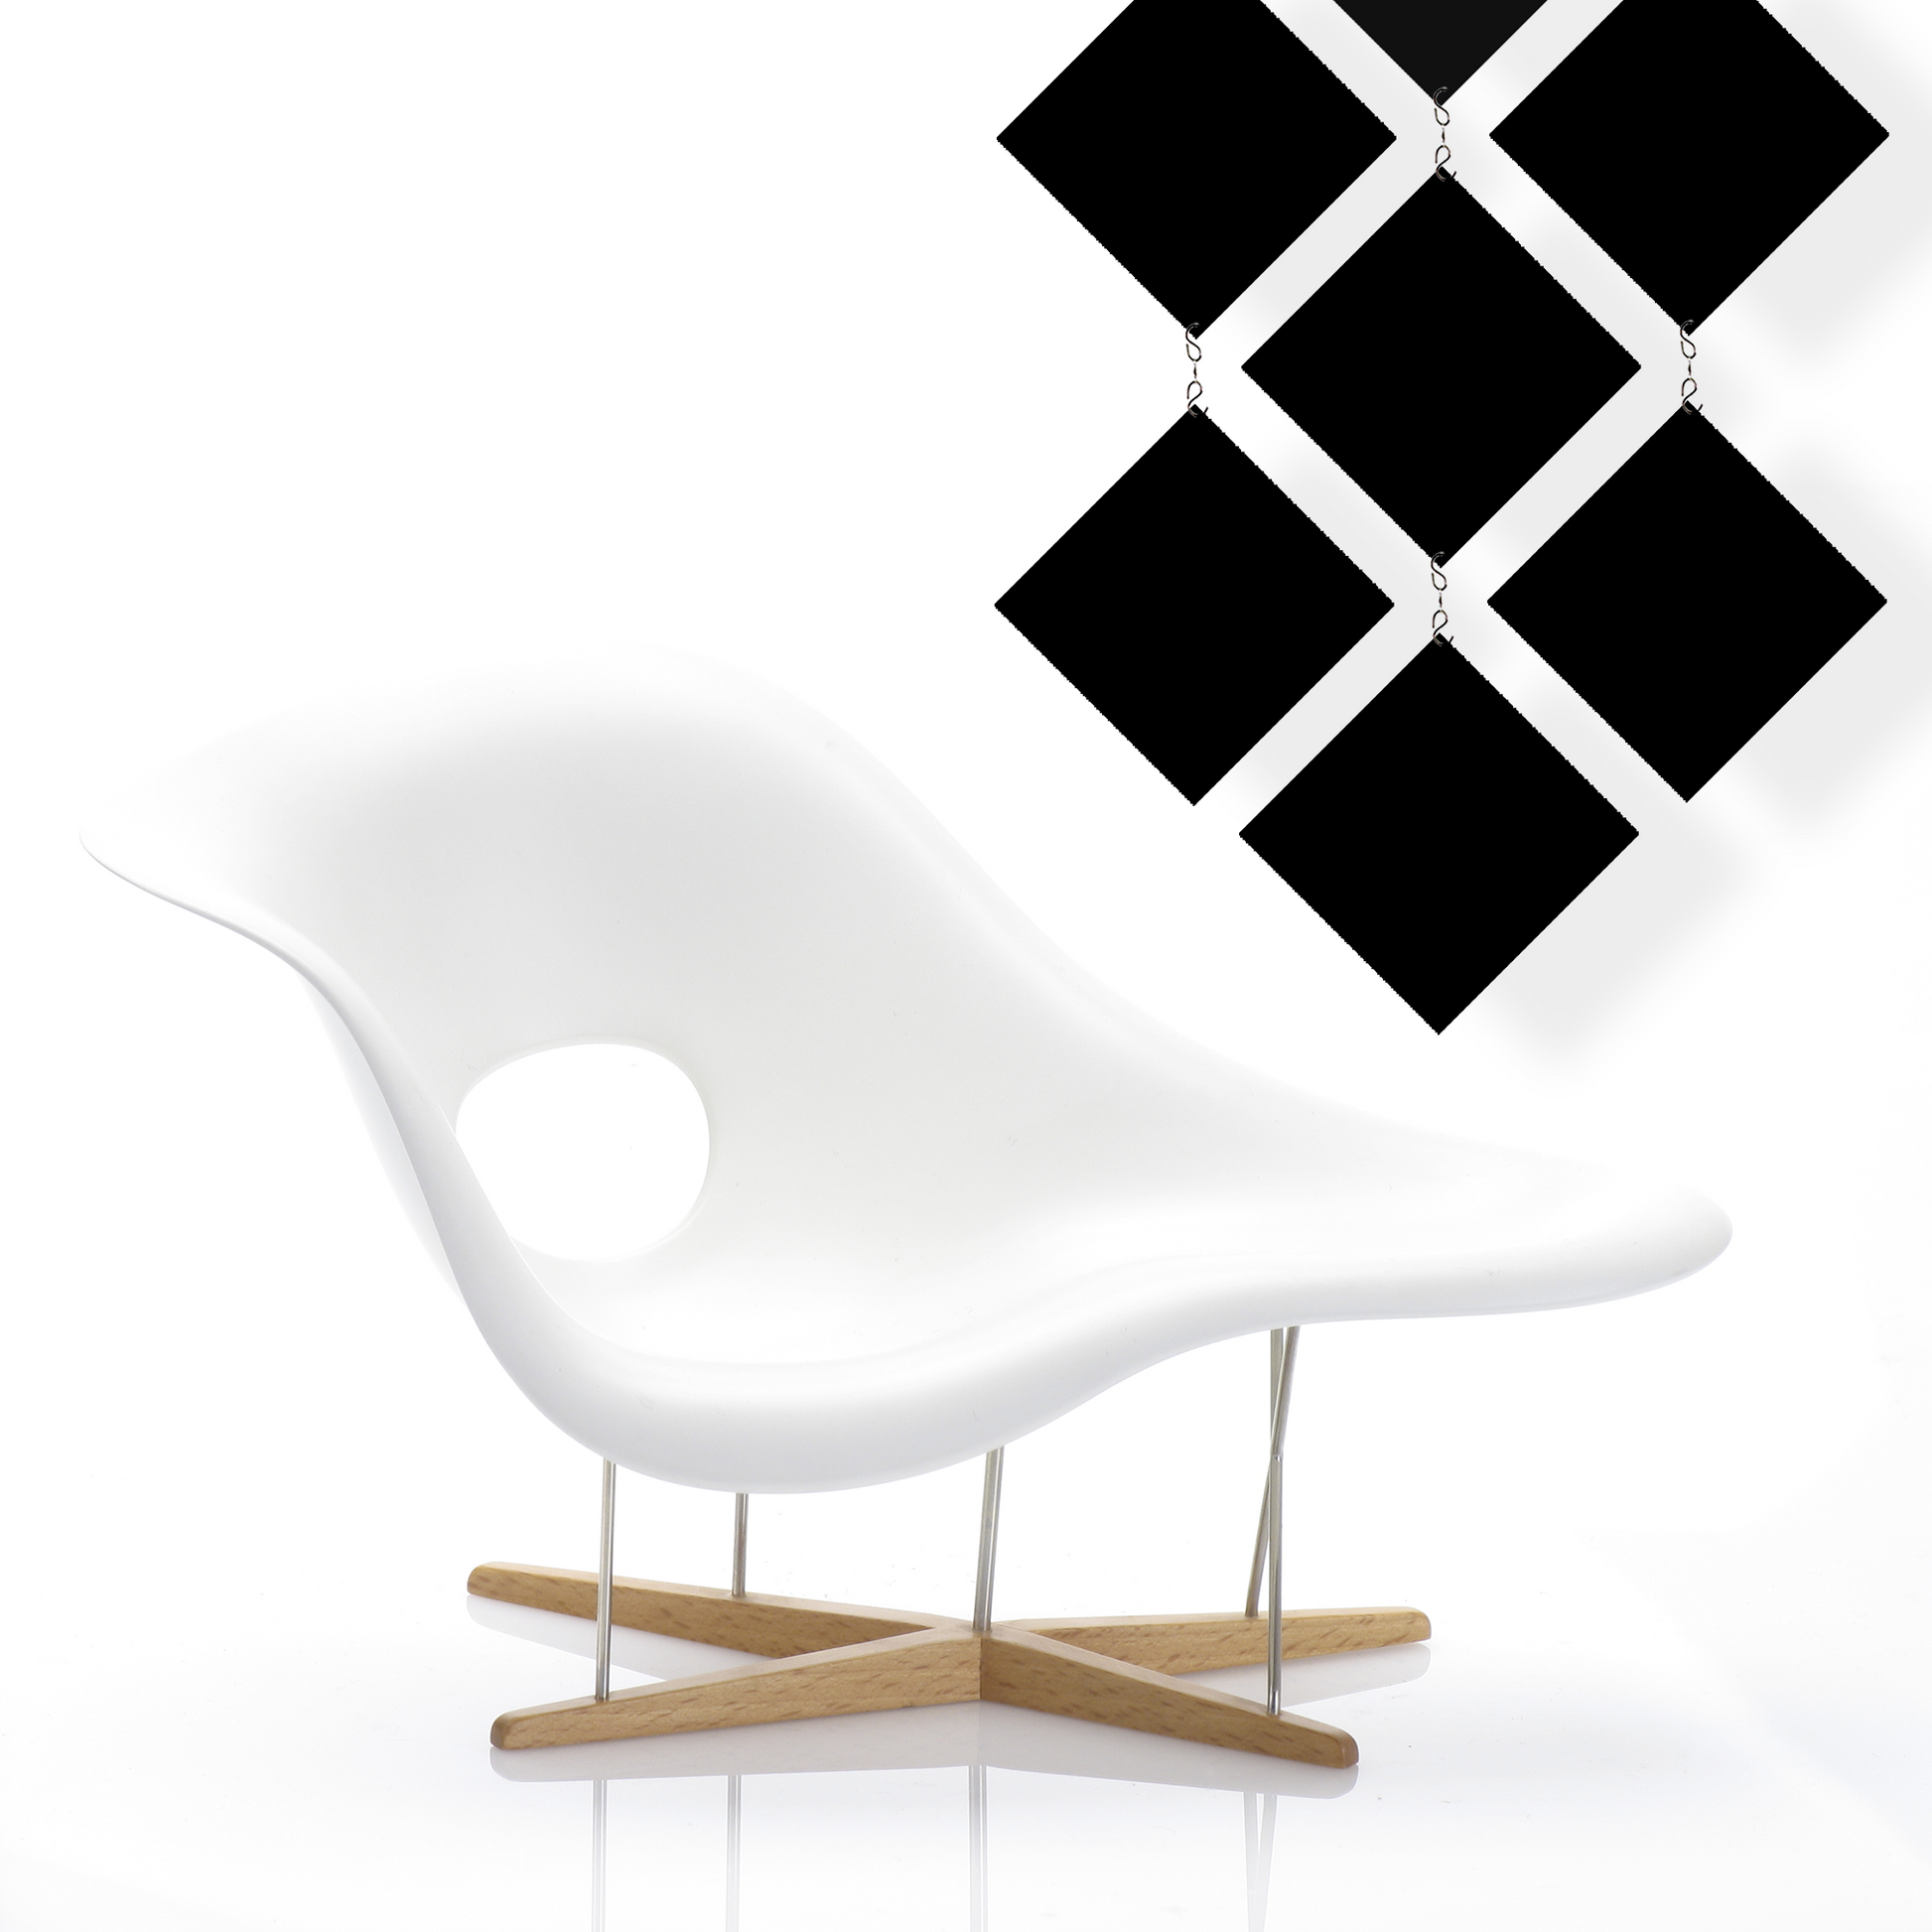 Black MODcast Diamond Pattern Hanging Kinetic Room Divider Panels with white eames chaise lounge - mid century modern kinetic art by AtomicMobiles.com